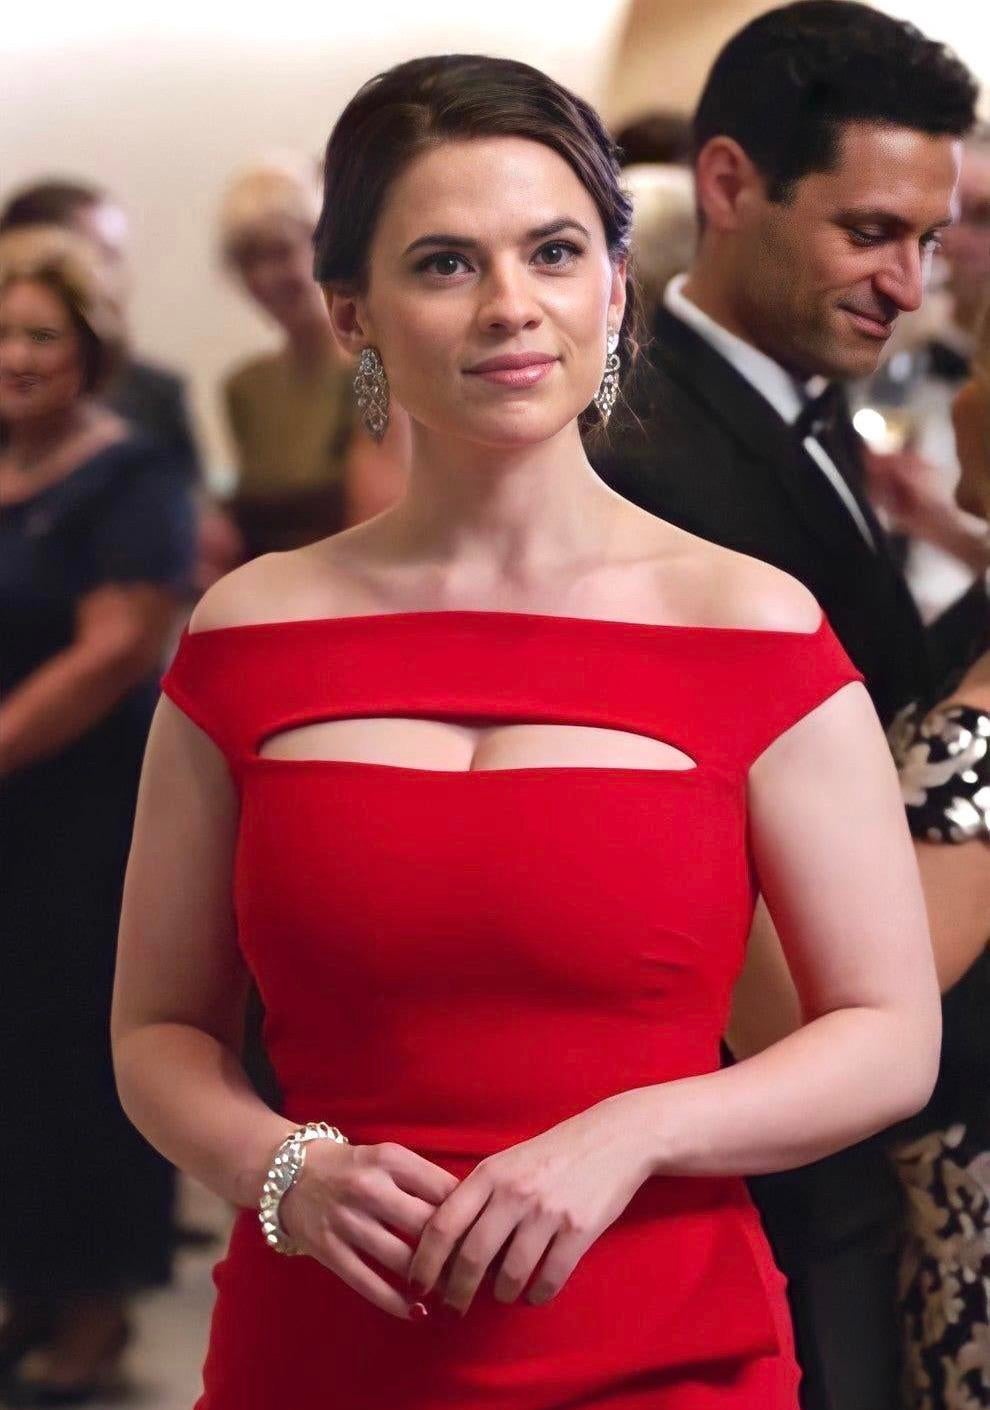 Hayley Atwell looking over the crowd 39